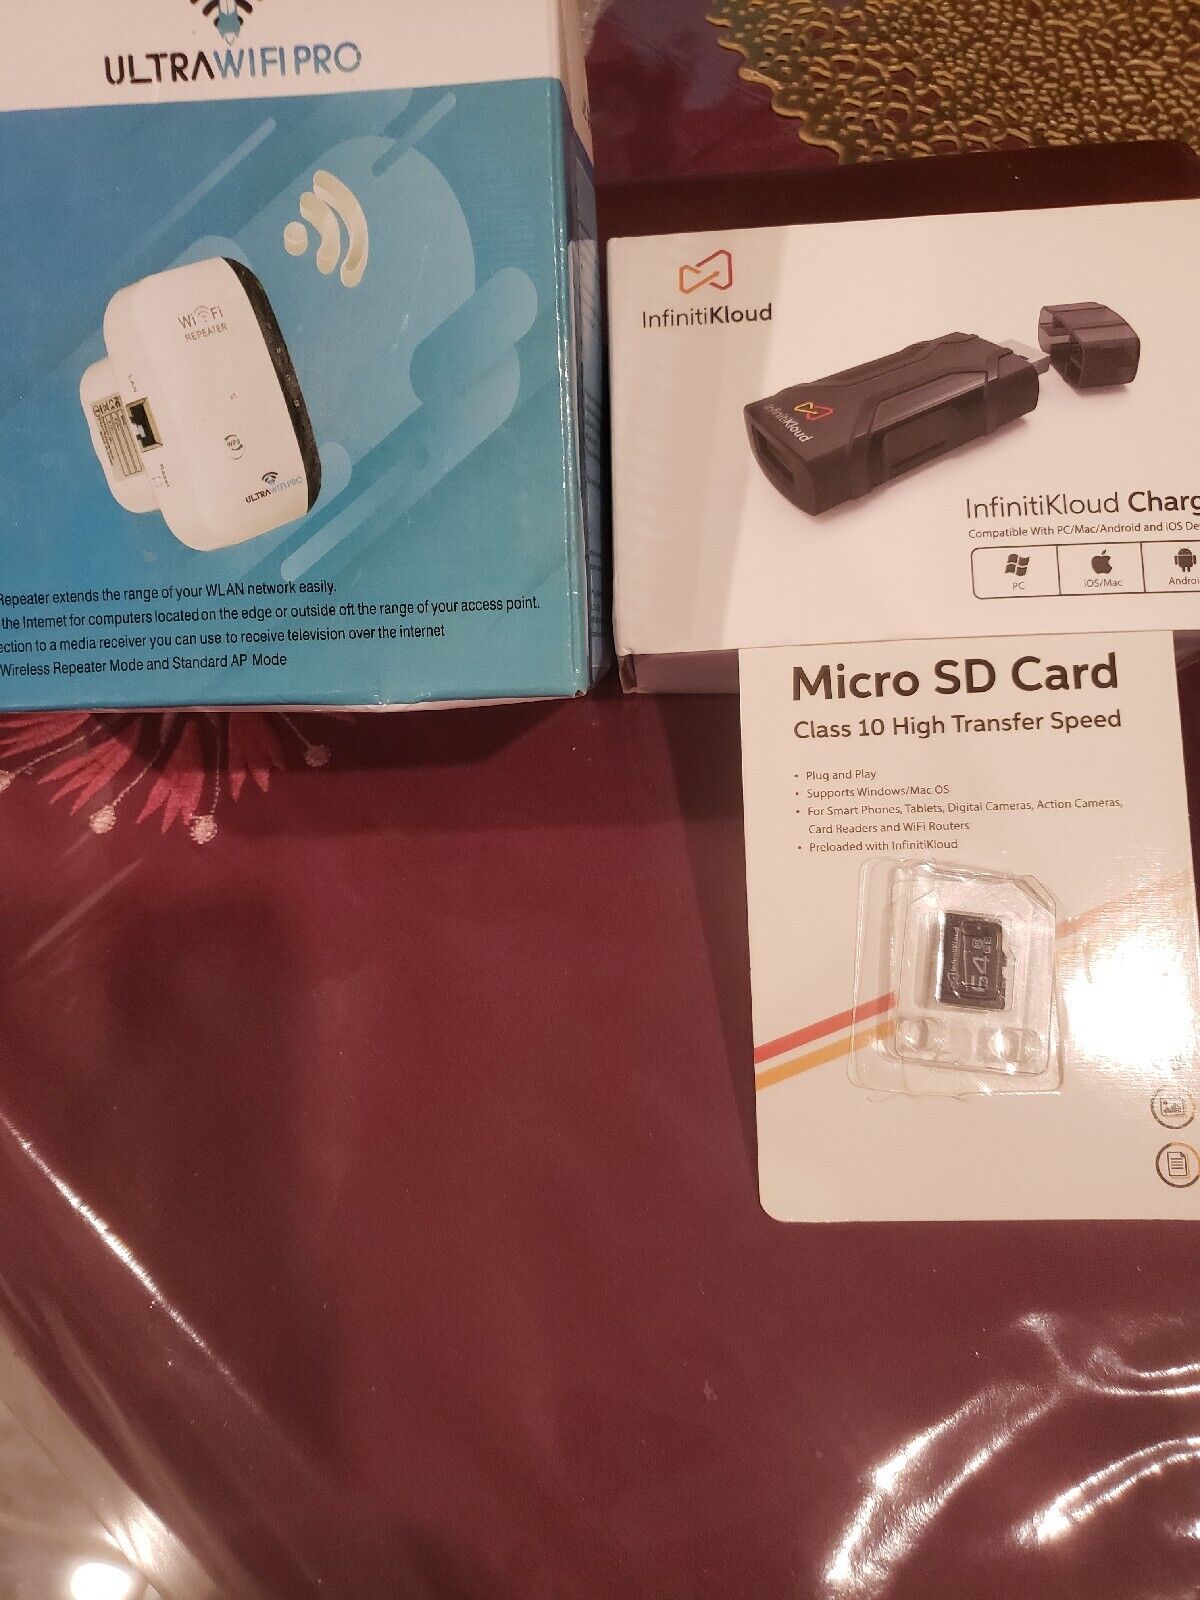 NIB Ultra Wifi Pro Repeater  Extender 300Mps Wireless & INFINITIKLOUD Charger